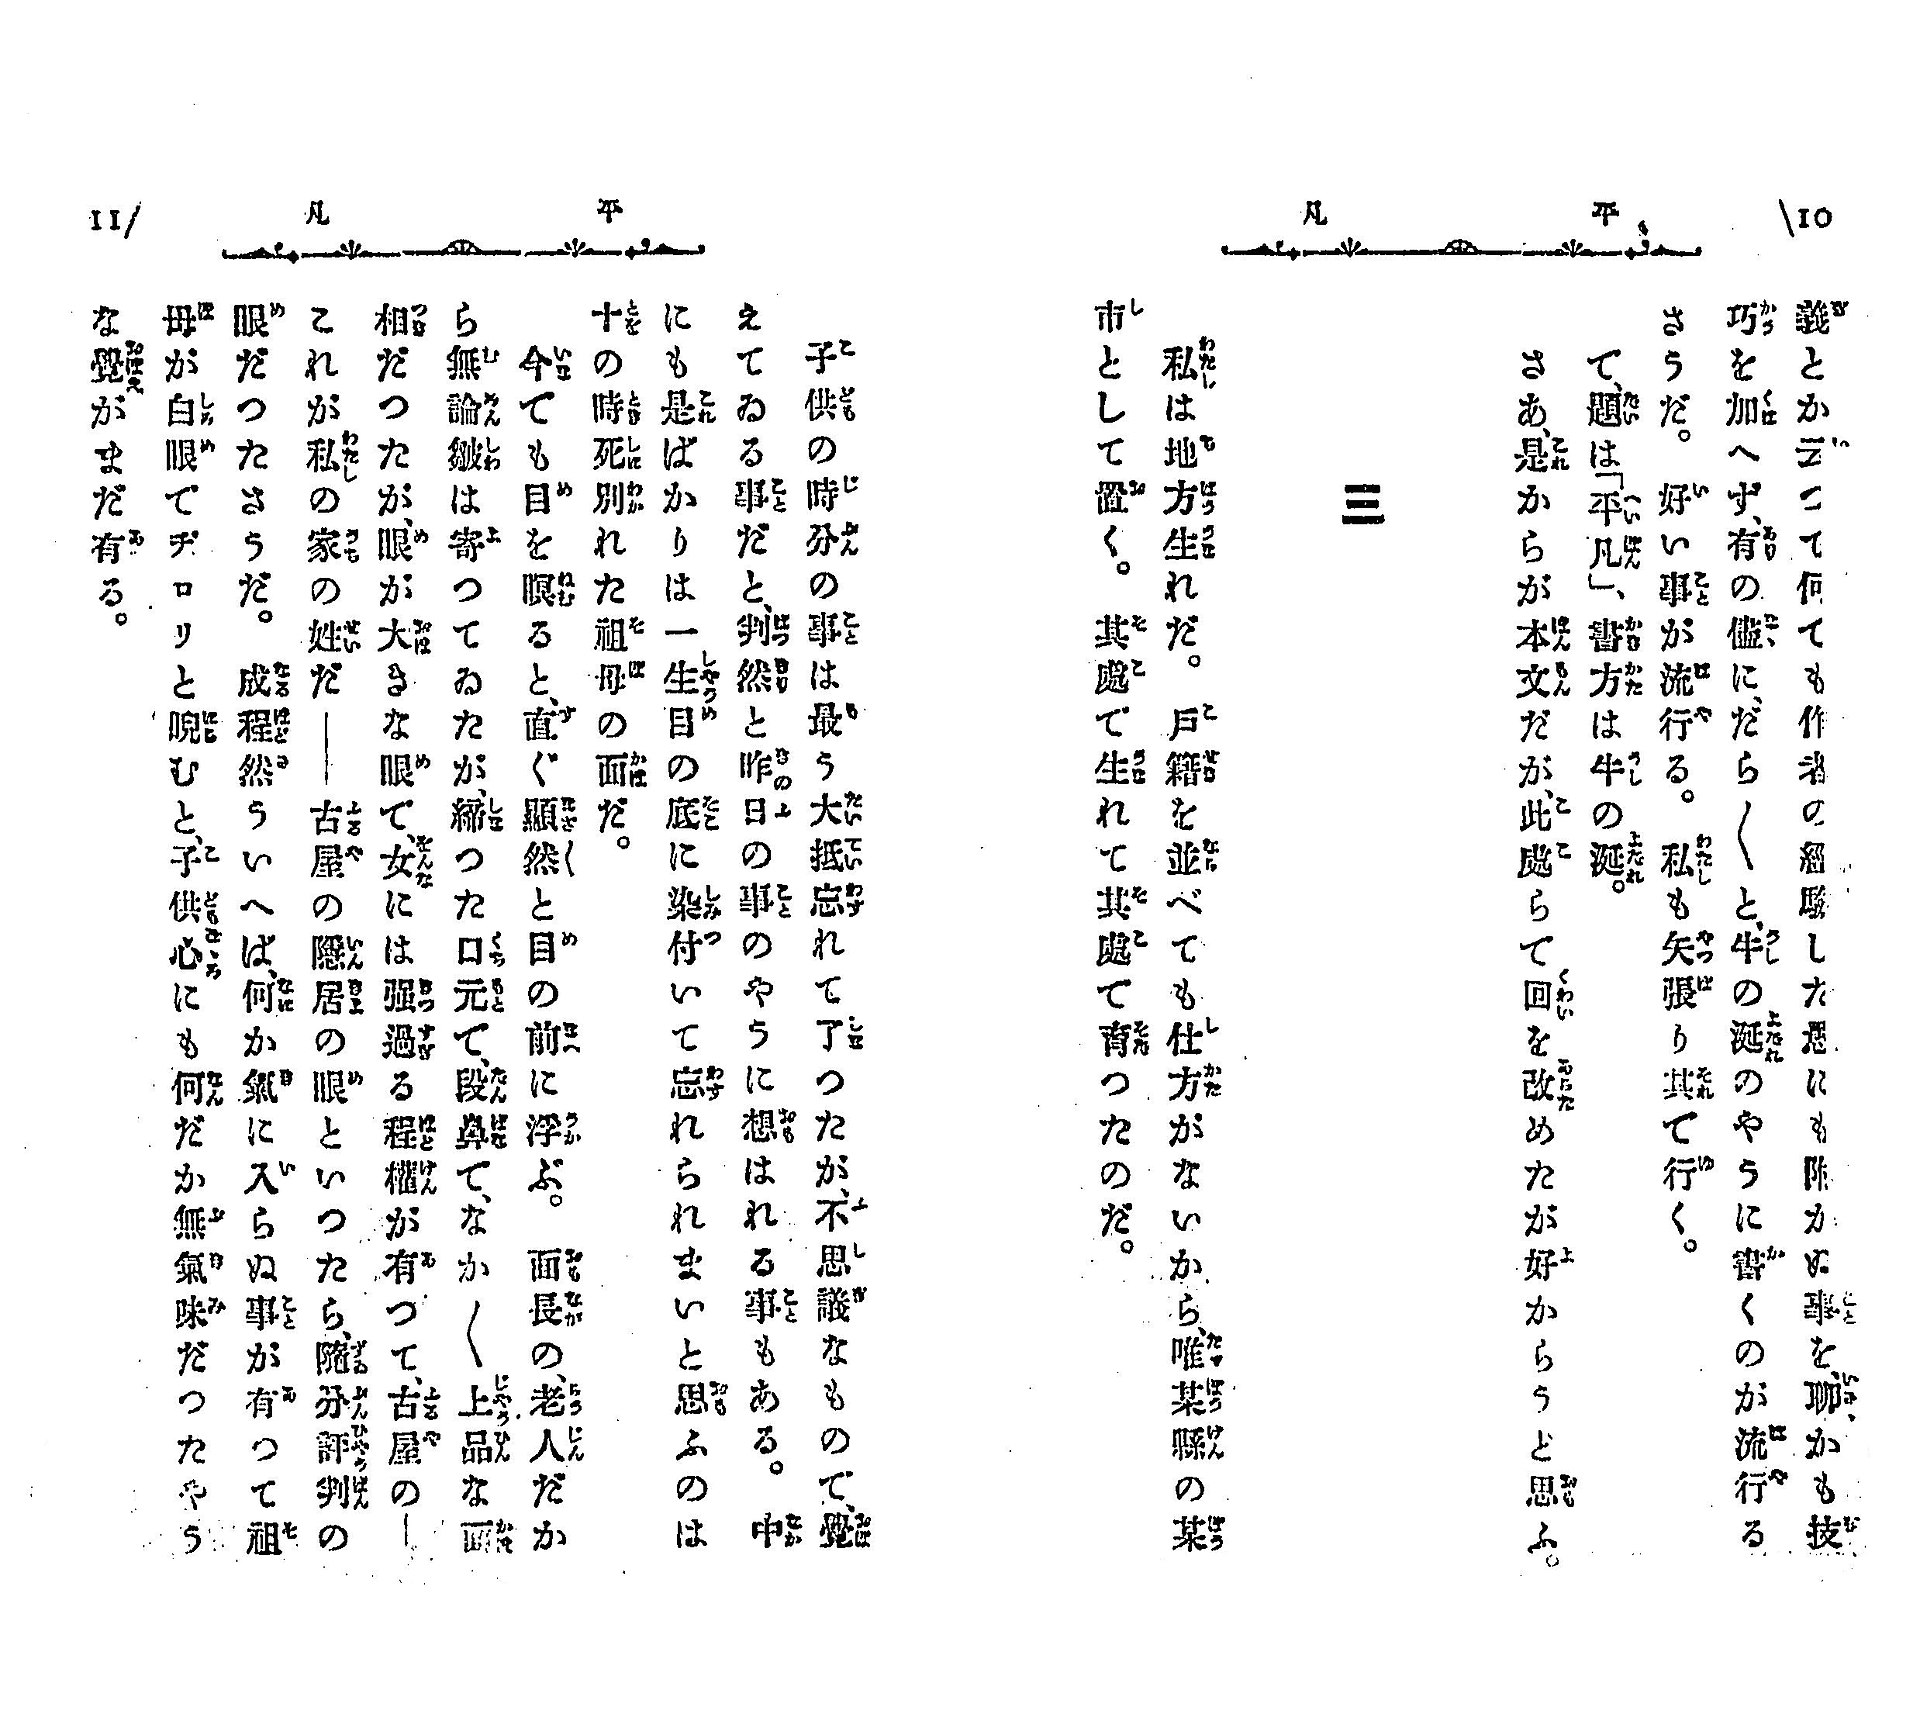 Japanese novel using 漢字仮名交じり文, most general orthography for modern Japanese writing system. Image from Wikipedia.